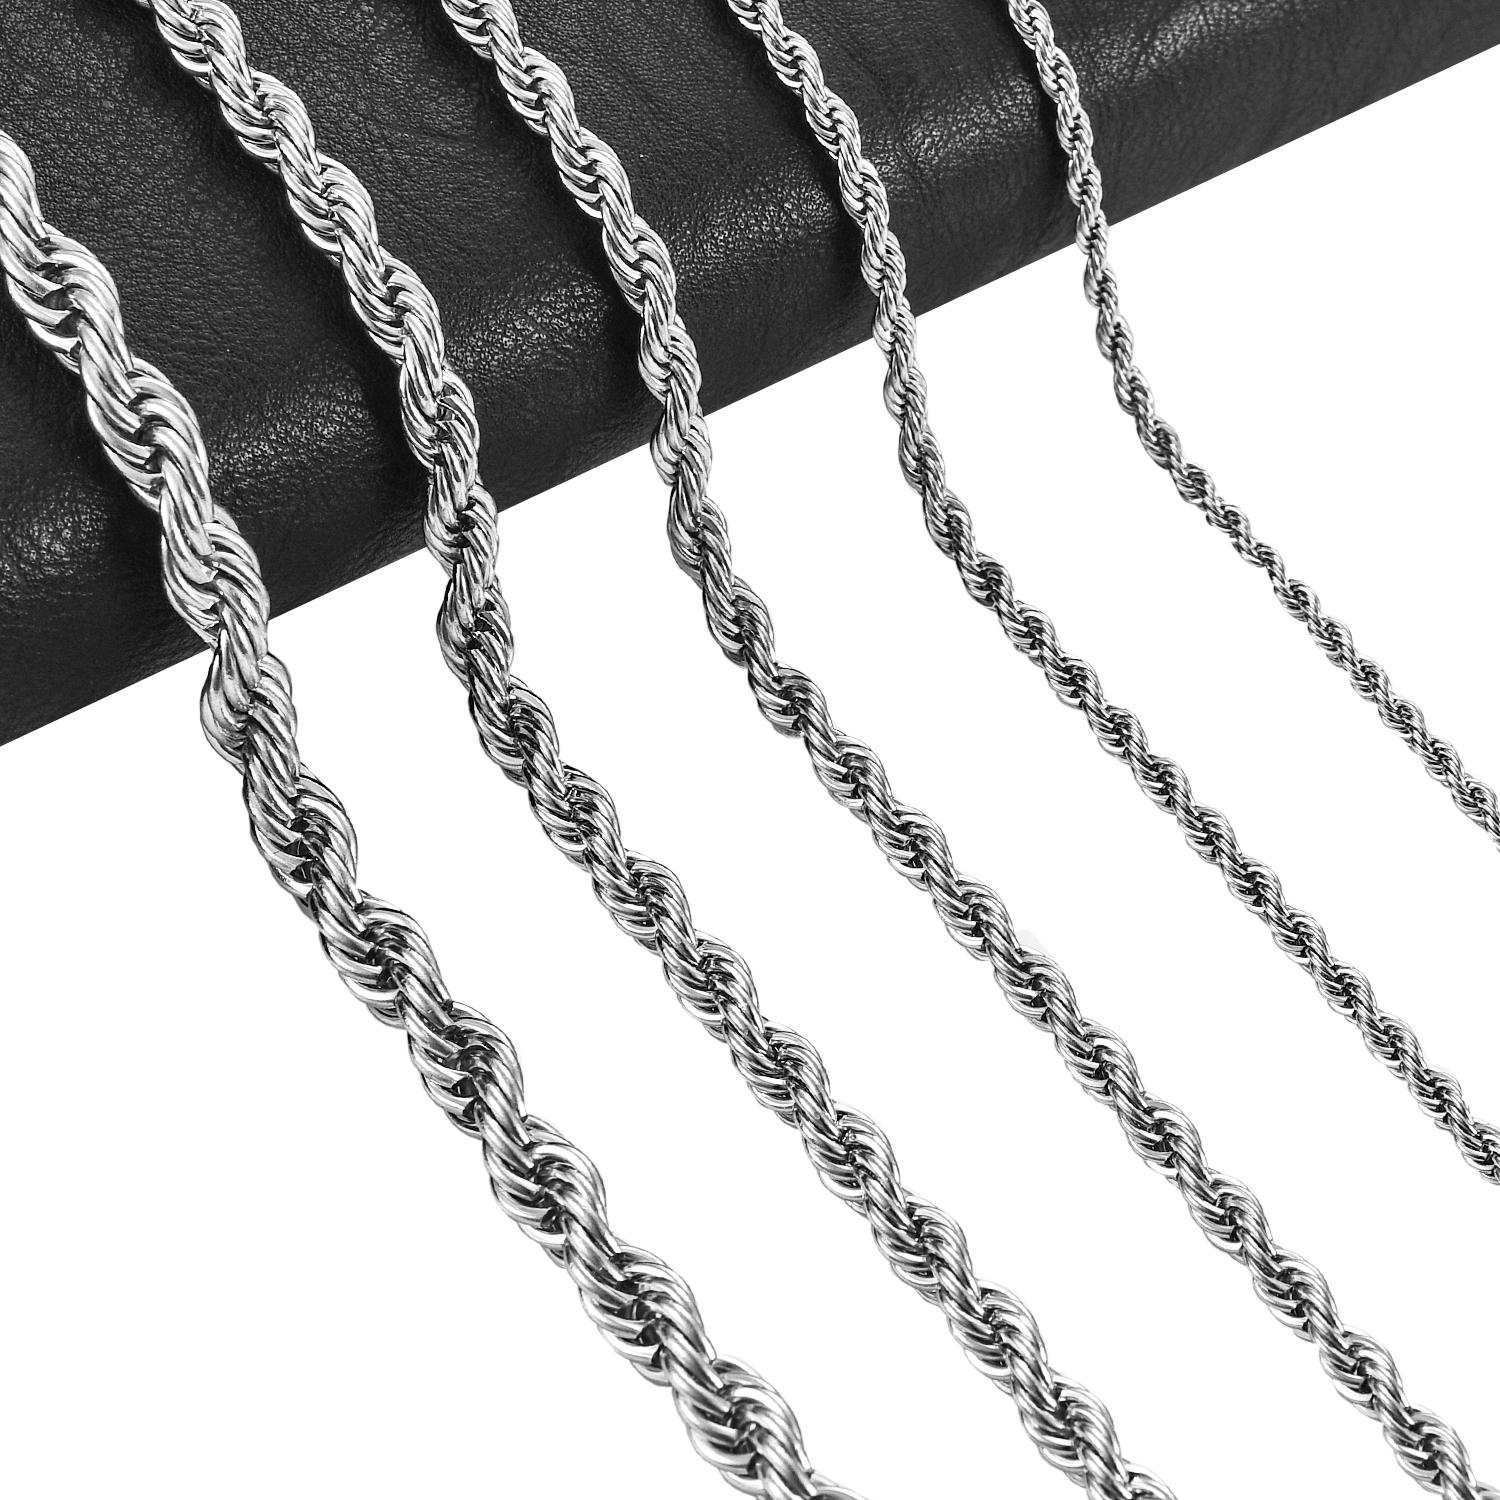 Taylor Erotic Lingerie New Punk Vintage Silver Color Stainless Steel Men's Rope Chain 2/3/4/5/6mm-6mm Fashion Jewelry Necklace for Women